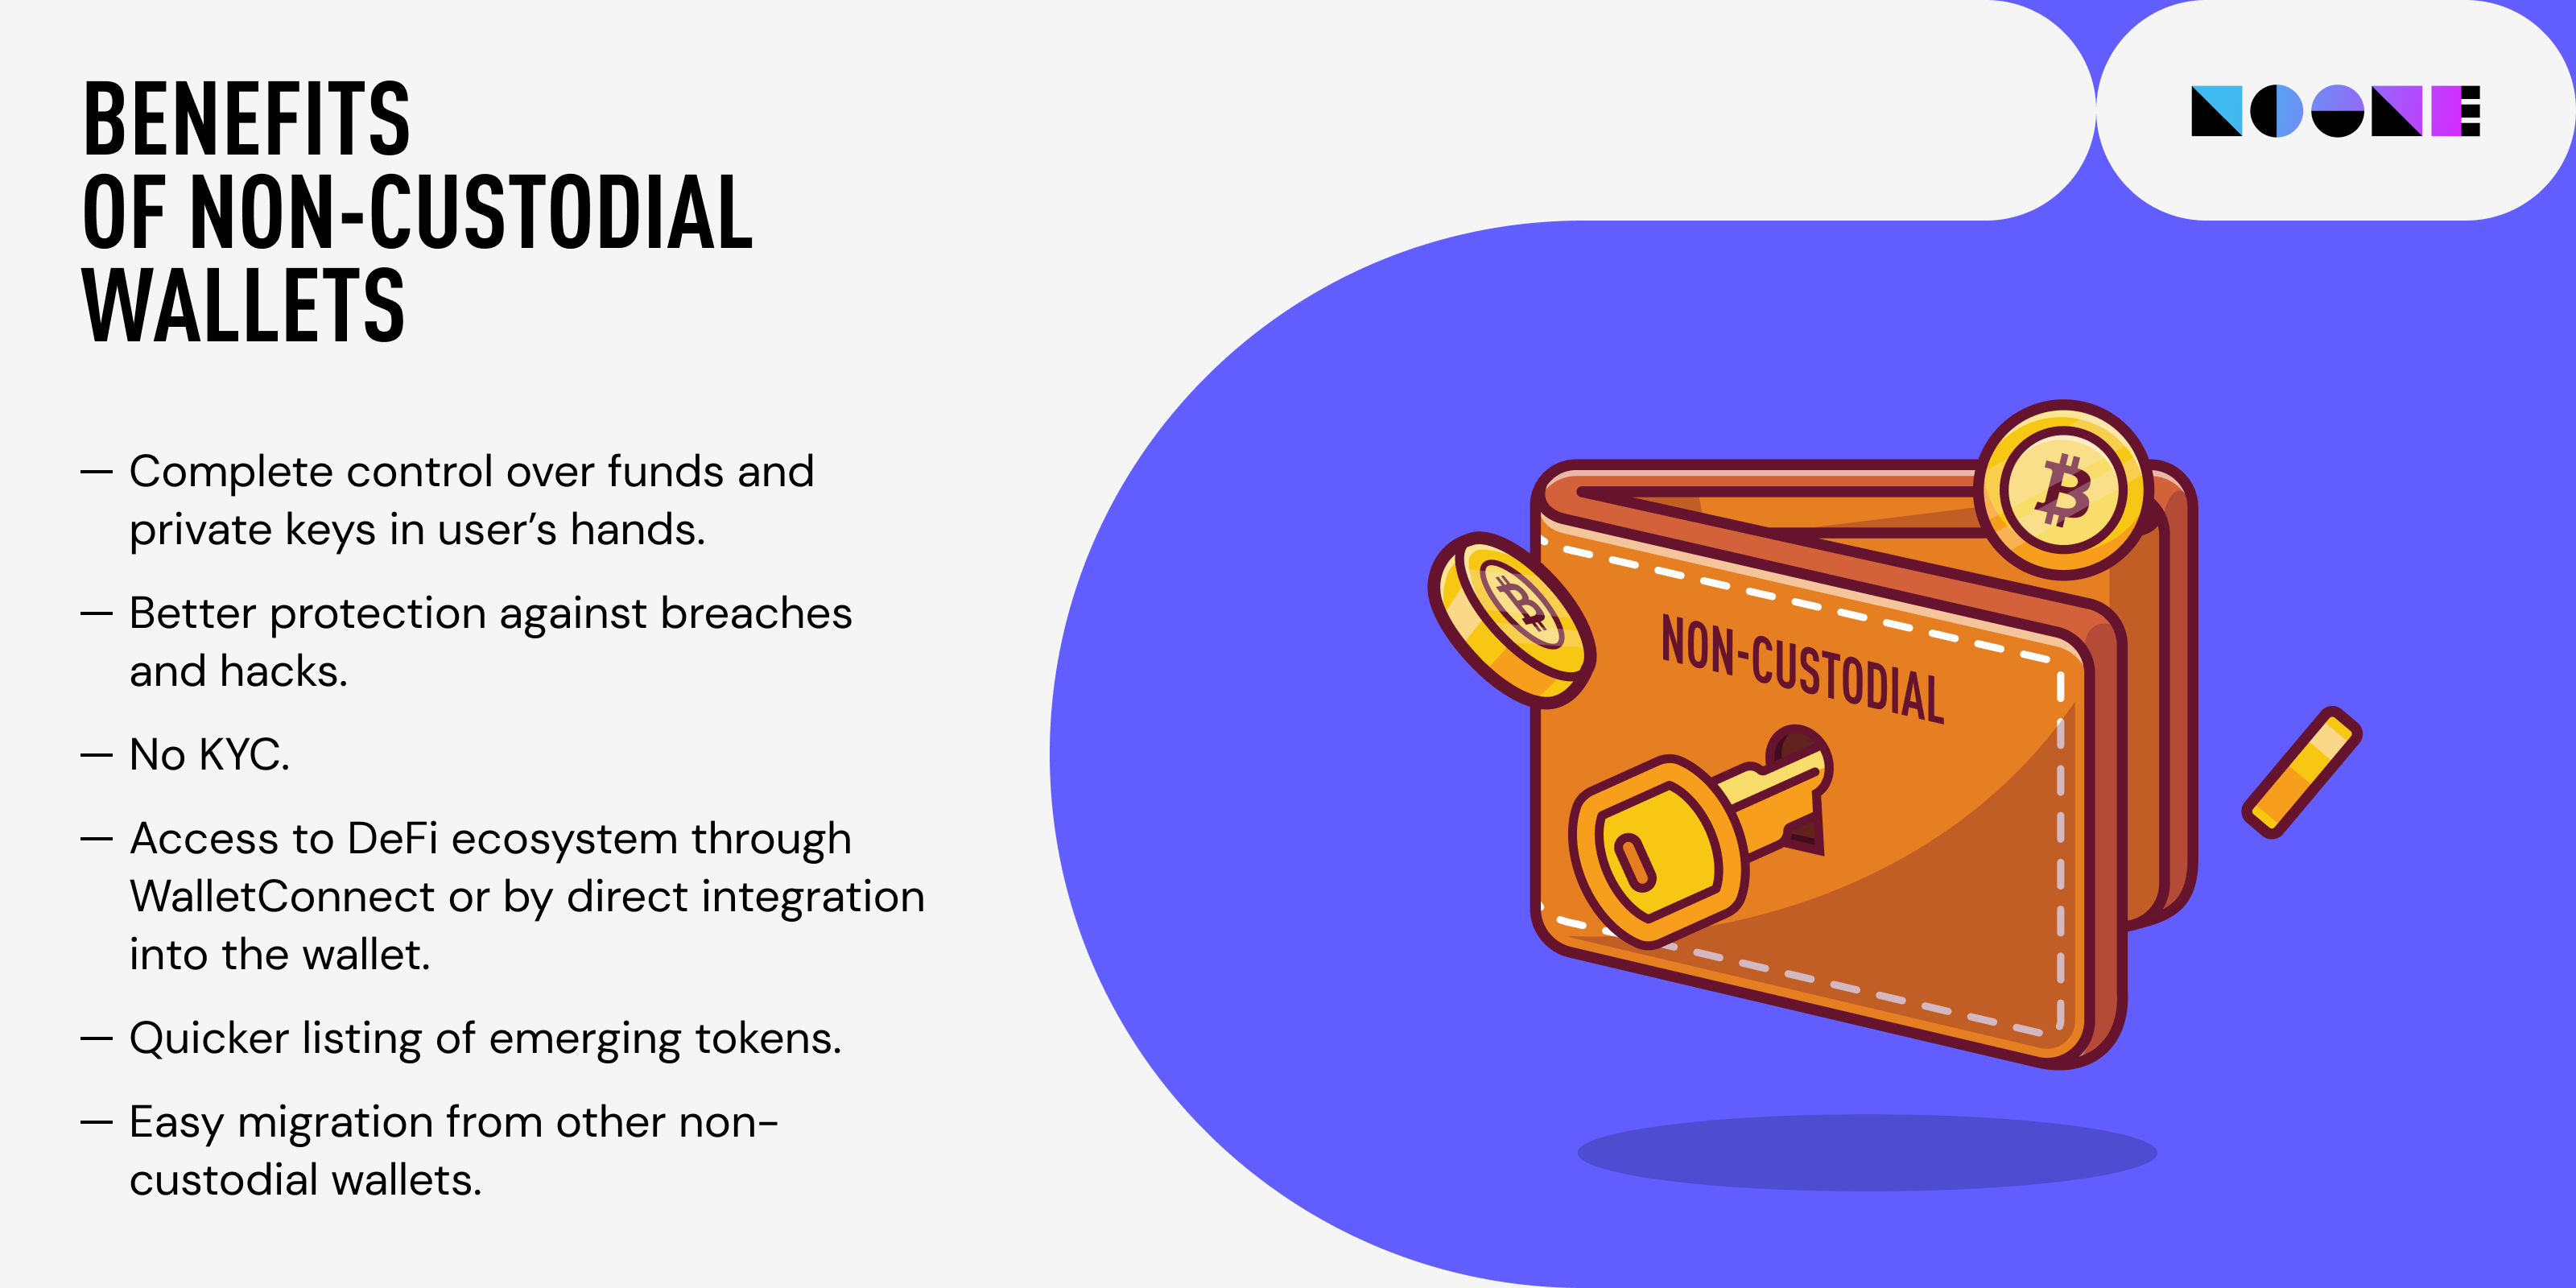 Benefits of non-custodial wallets